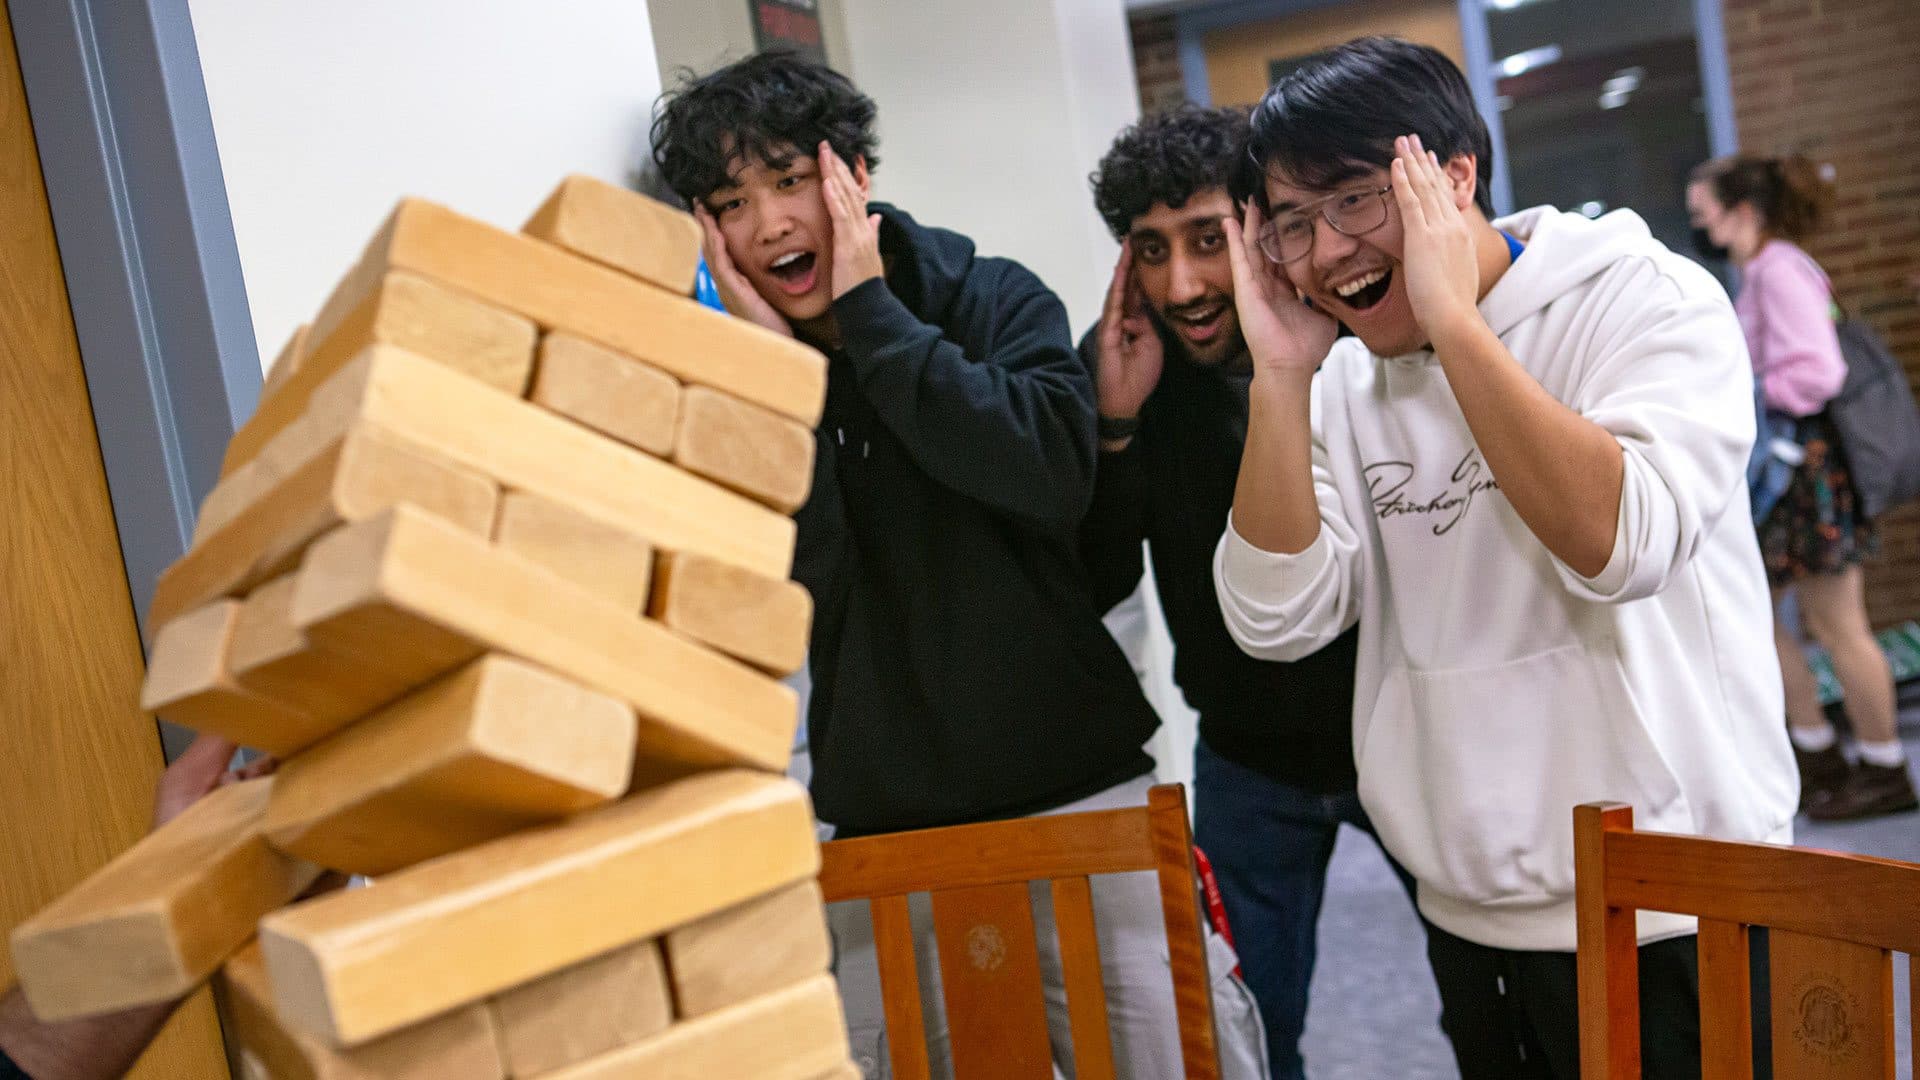 students watch a jenga tower fall and laugh